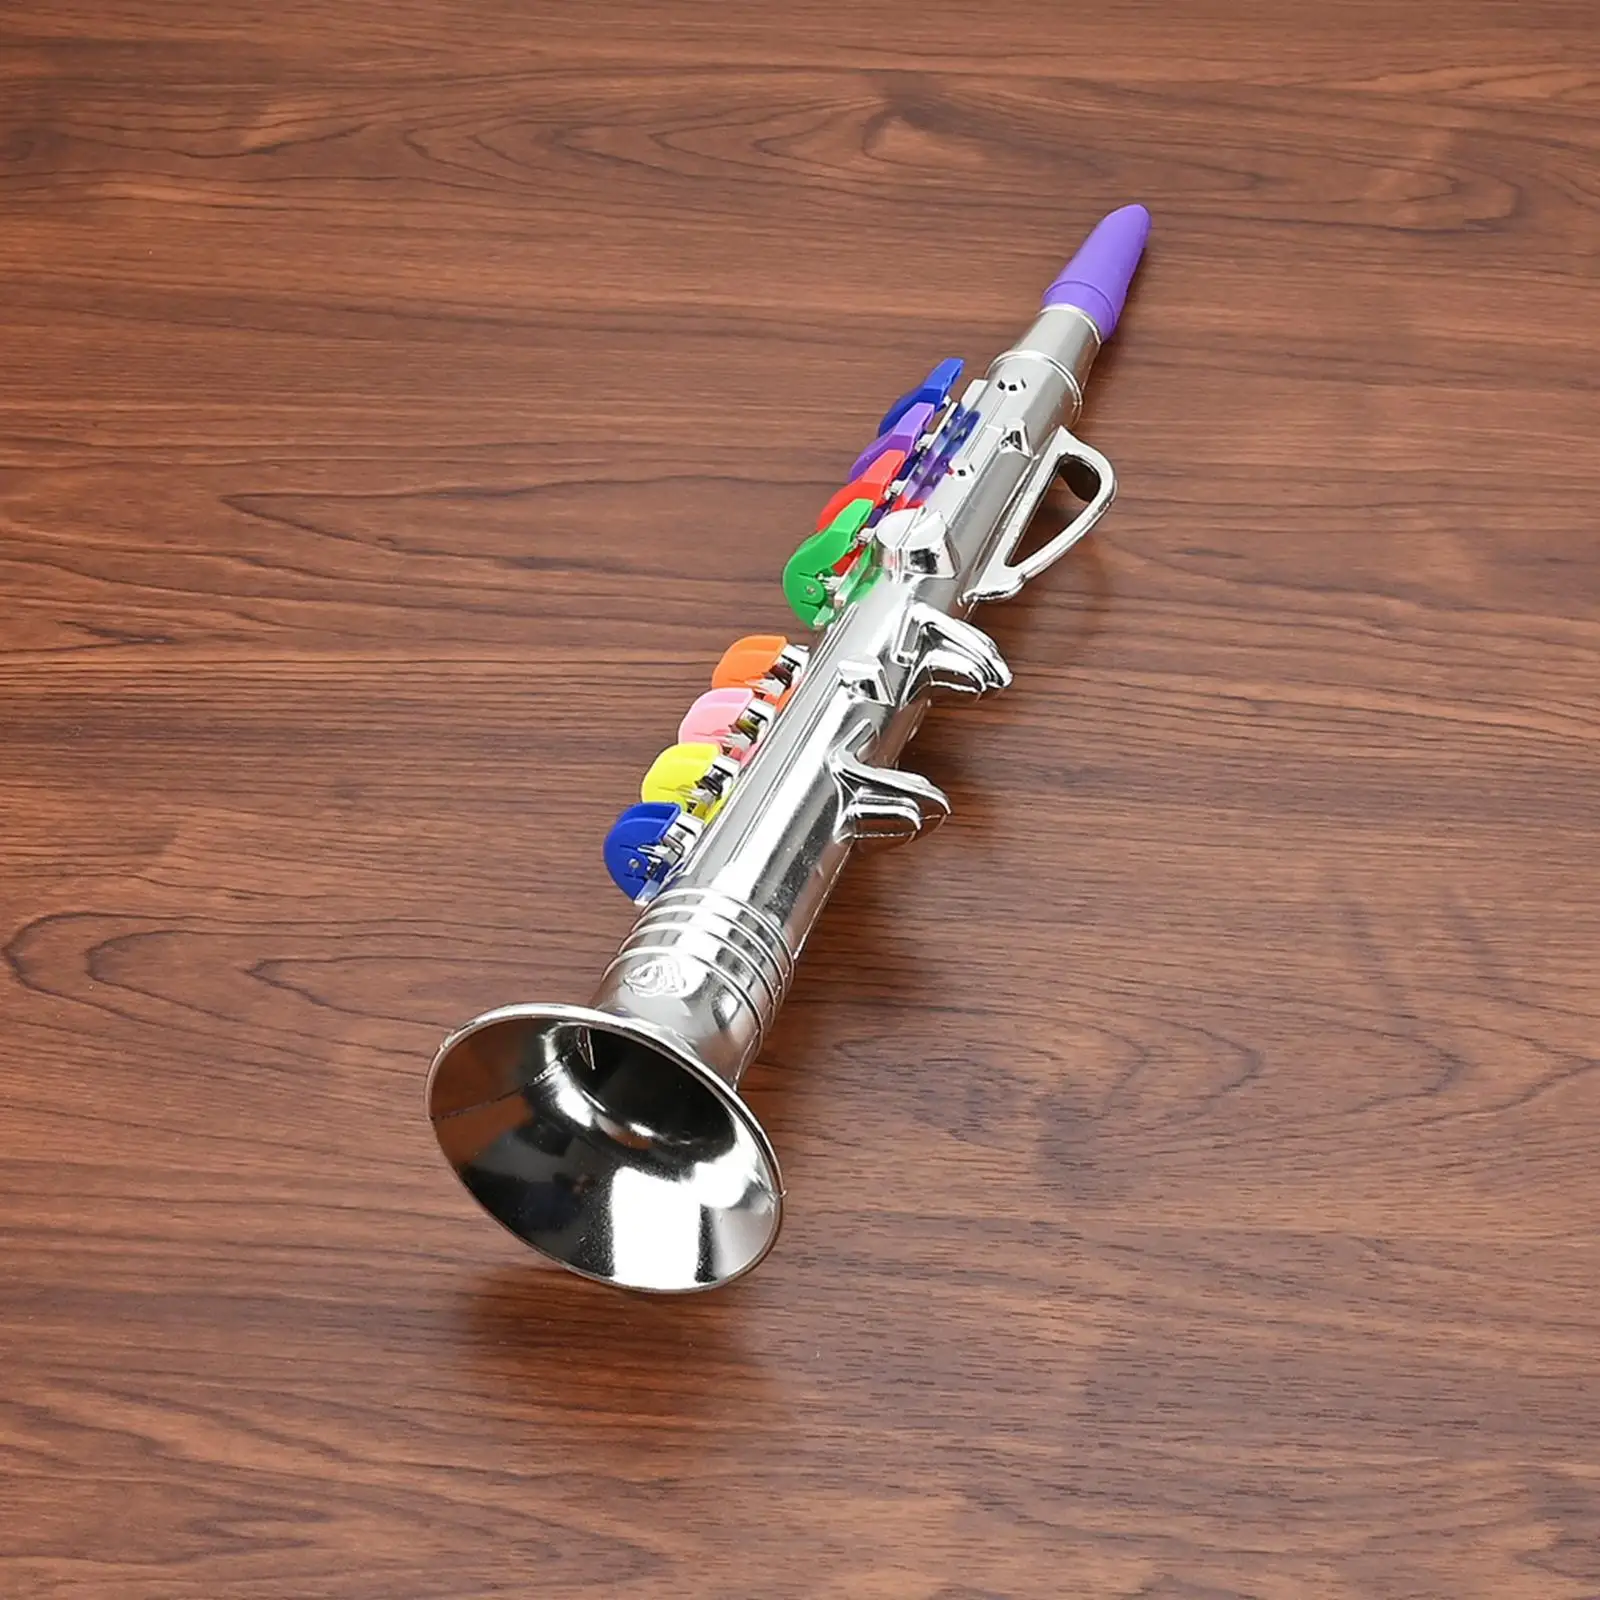 8 Notes Kids Saxophone Trumpet Clarinet Simulation Music Playing Educational Durable Portable Mini for Party Toy Gifts Children